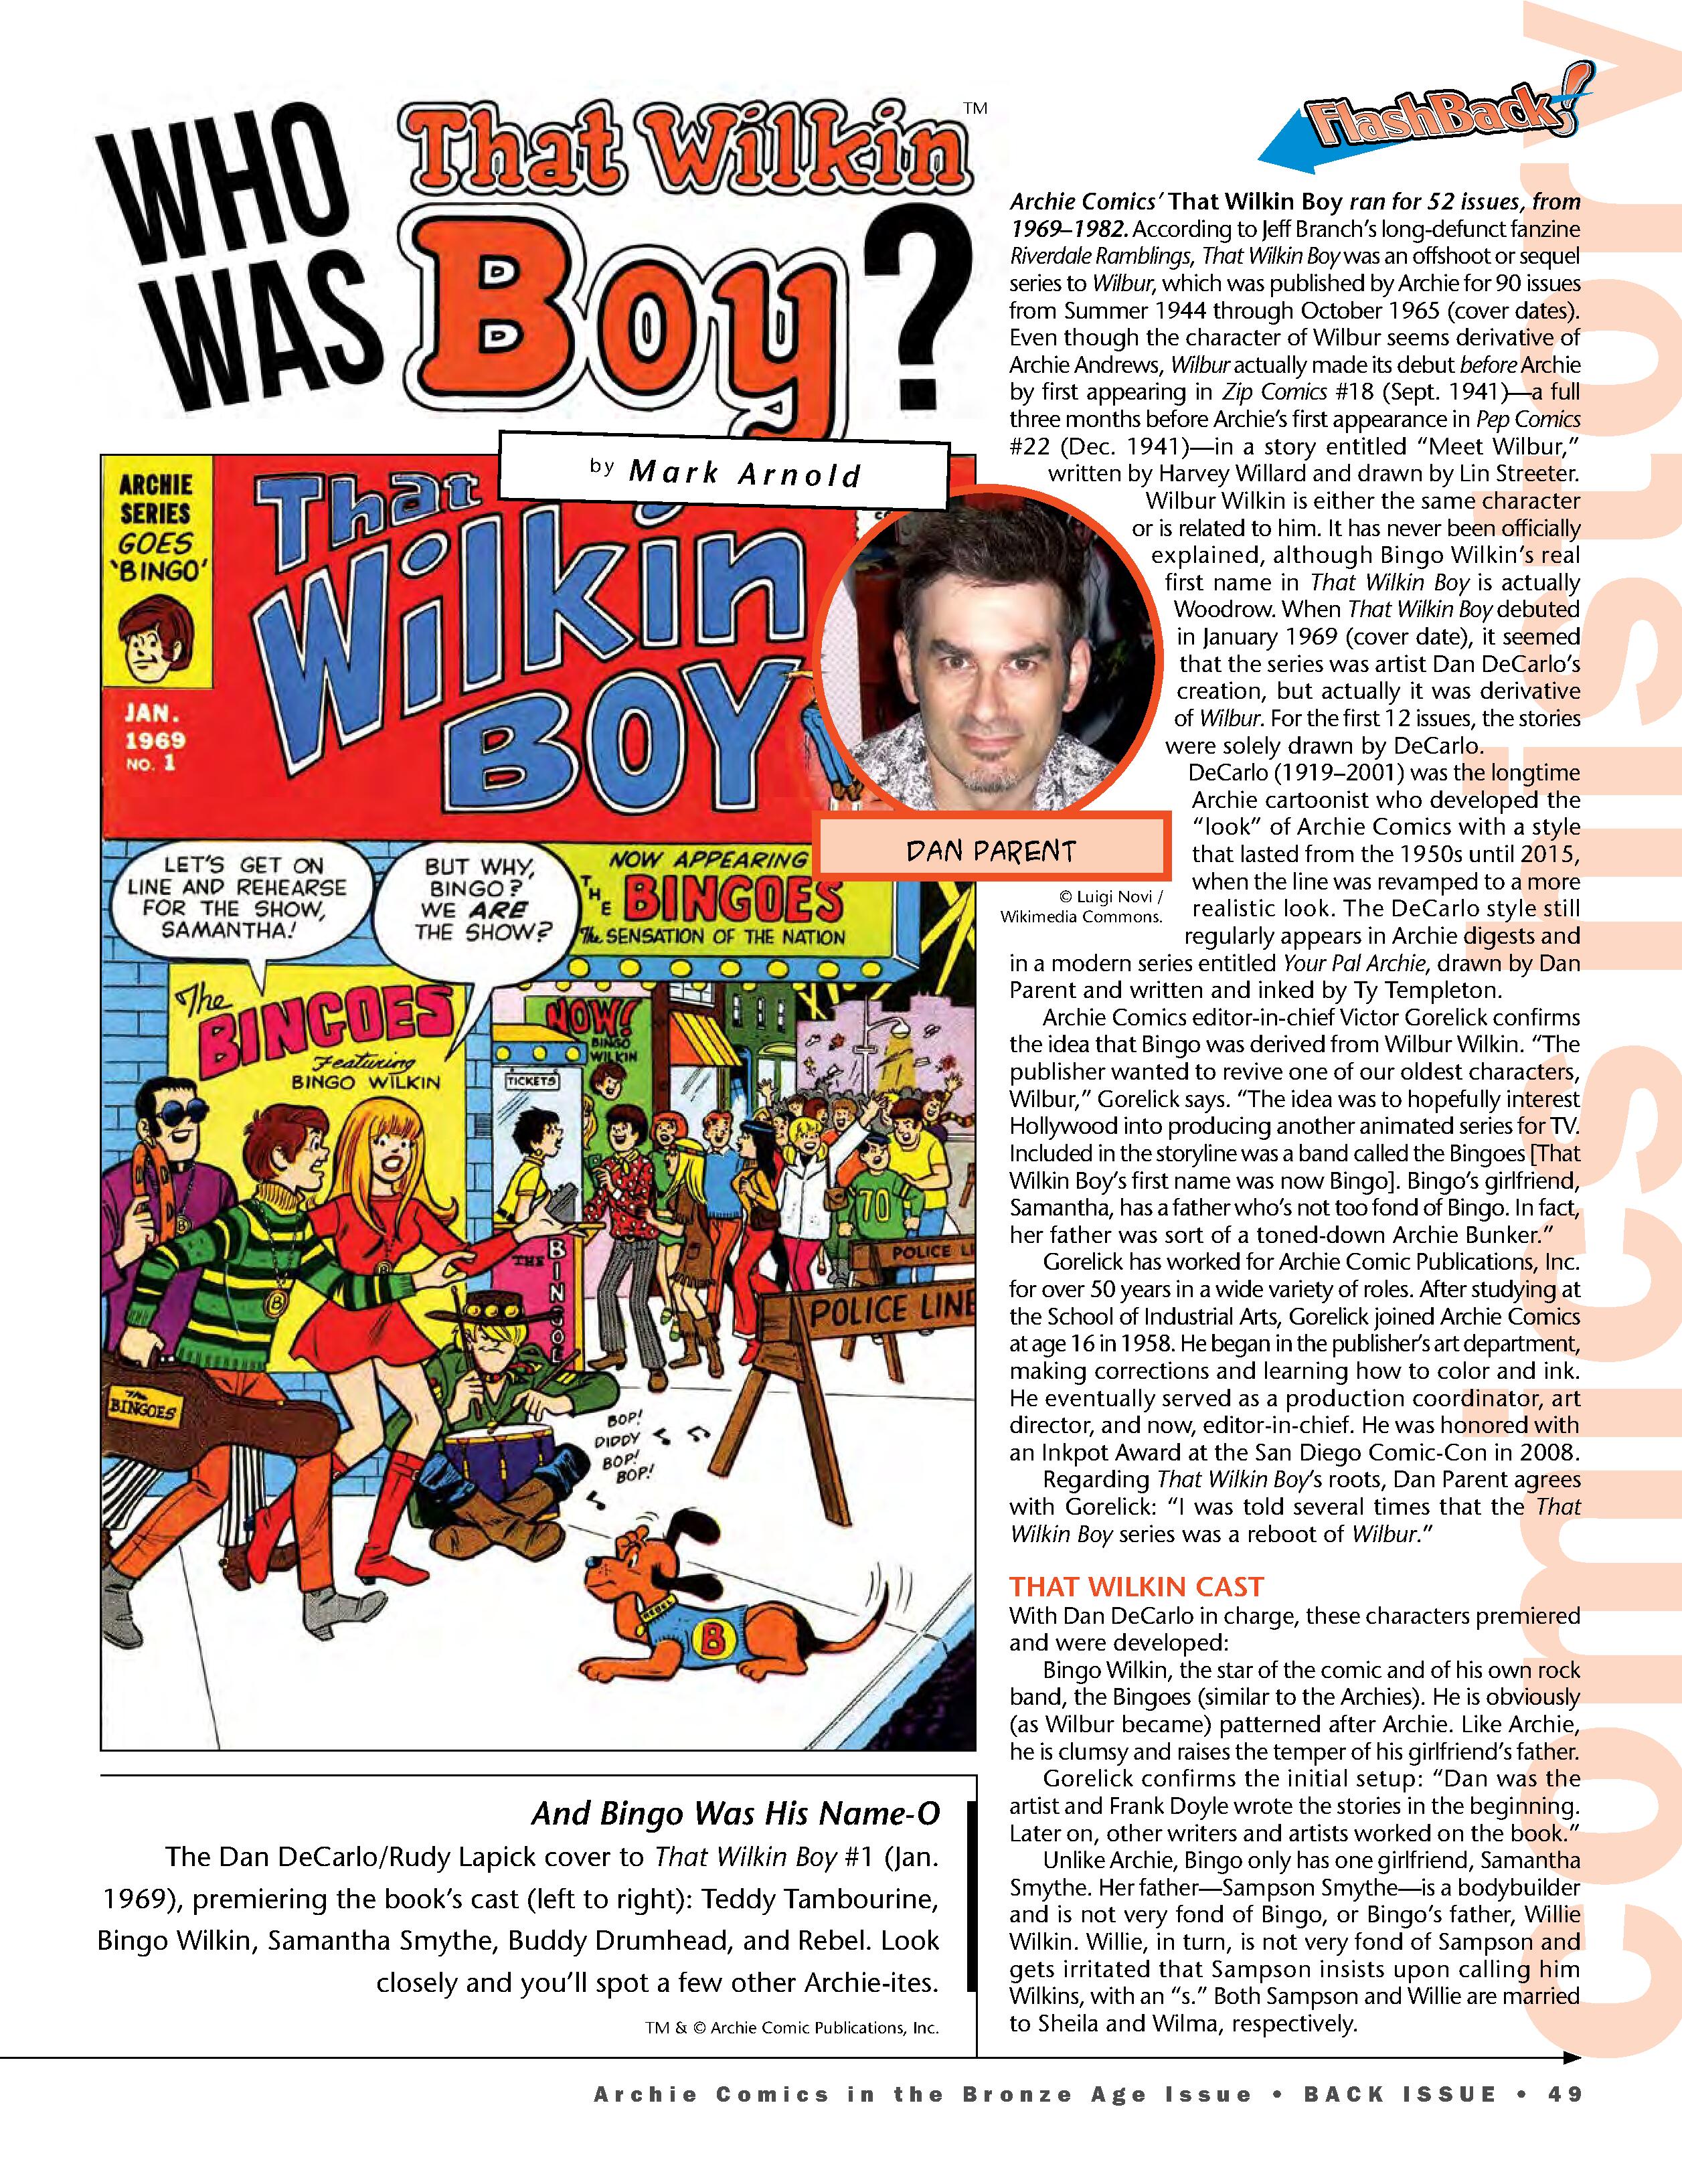 Read online Back Issue comic -  Issue #107 - 51